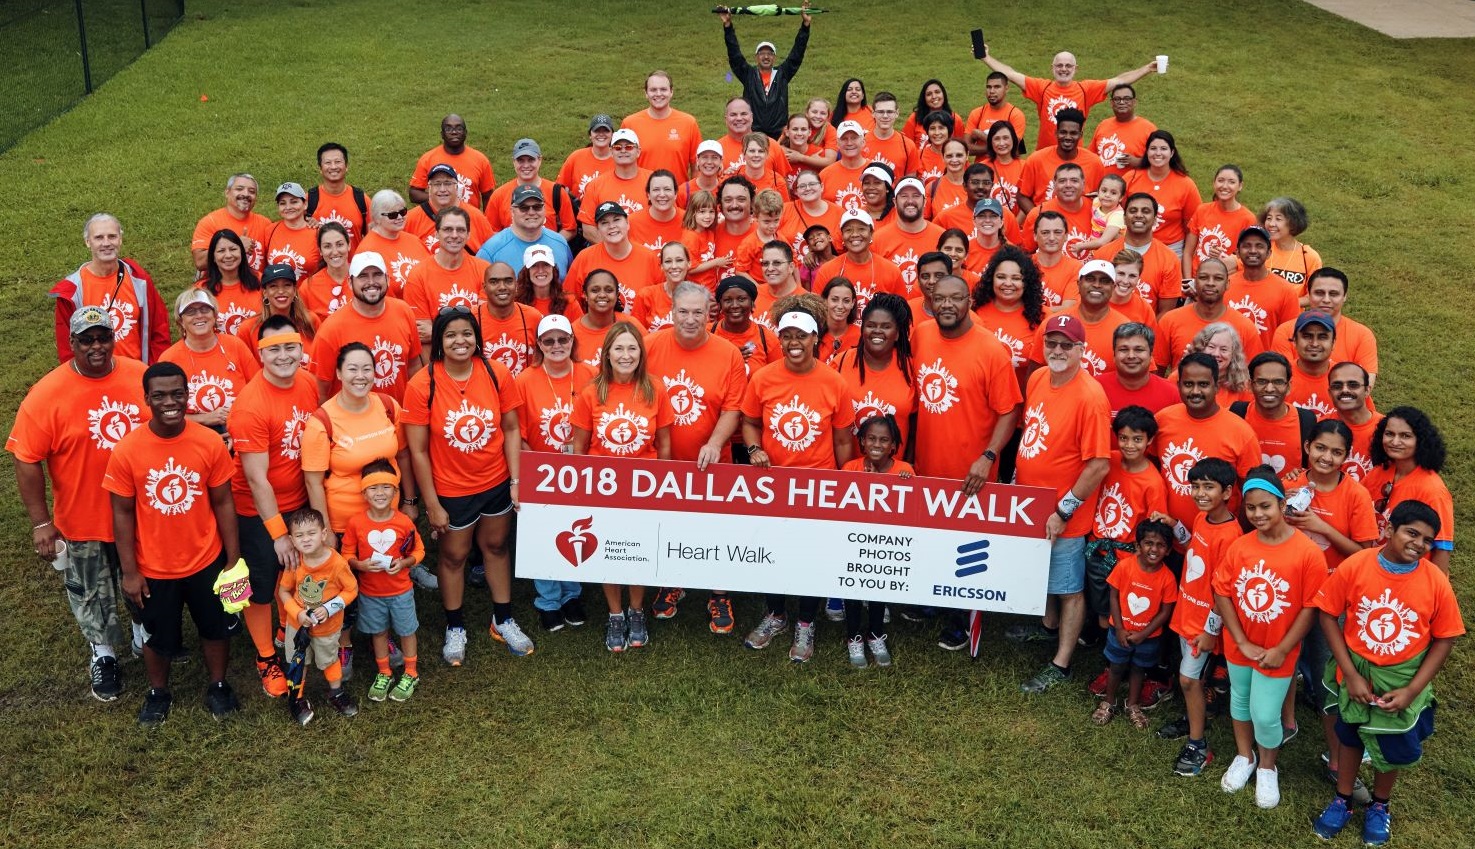 Thomson Reuters employees at the Heart Walk fundraiser for the American Heart Association, 2018